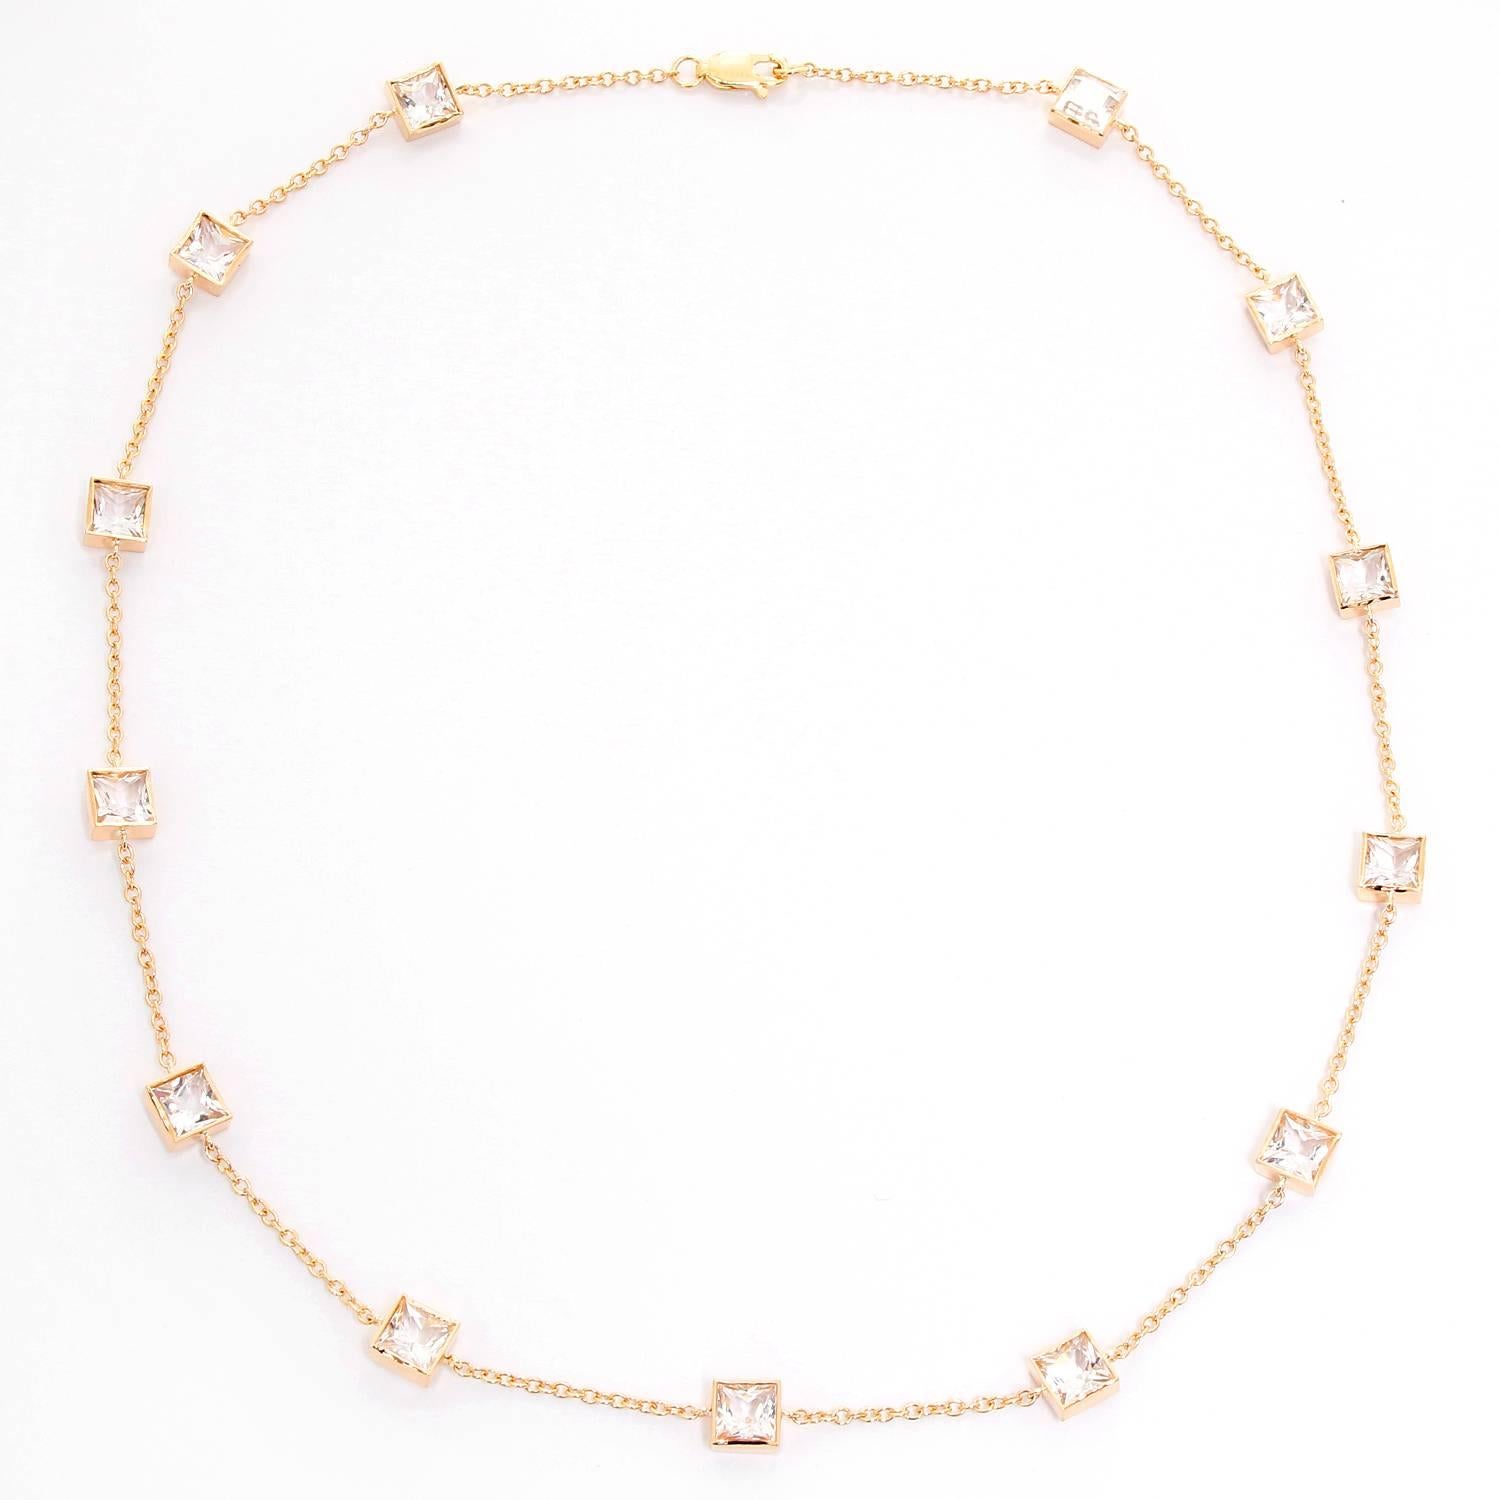 14K Yellow Gold White Topaz Yard Diamond by a Yard Necklace - . 14K Yellow Gold with 13 beautiful White Topaz weighing 10 cts. 18' in length. Total weight 11.4 grams.